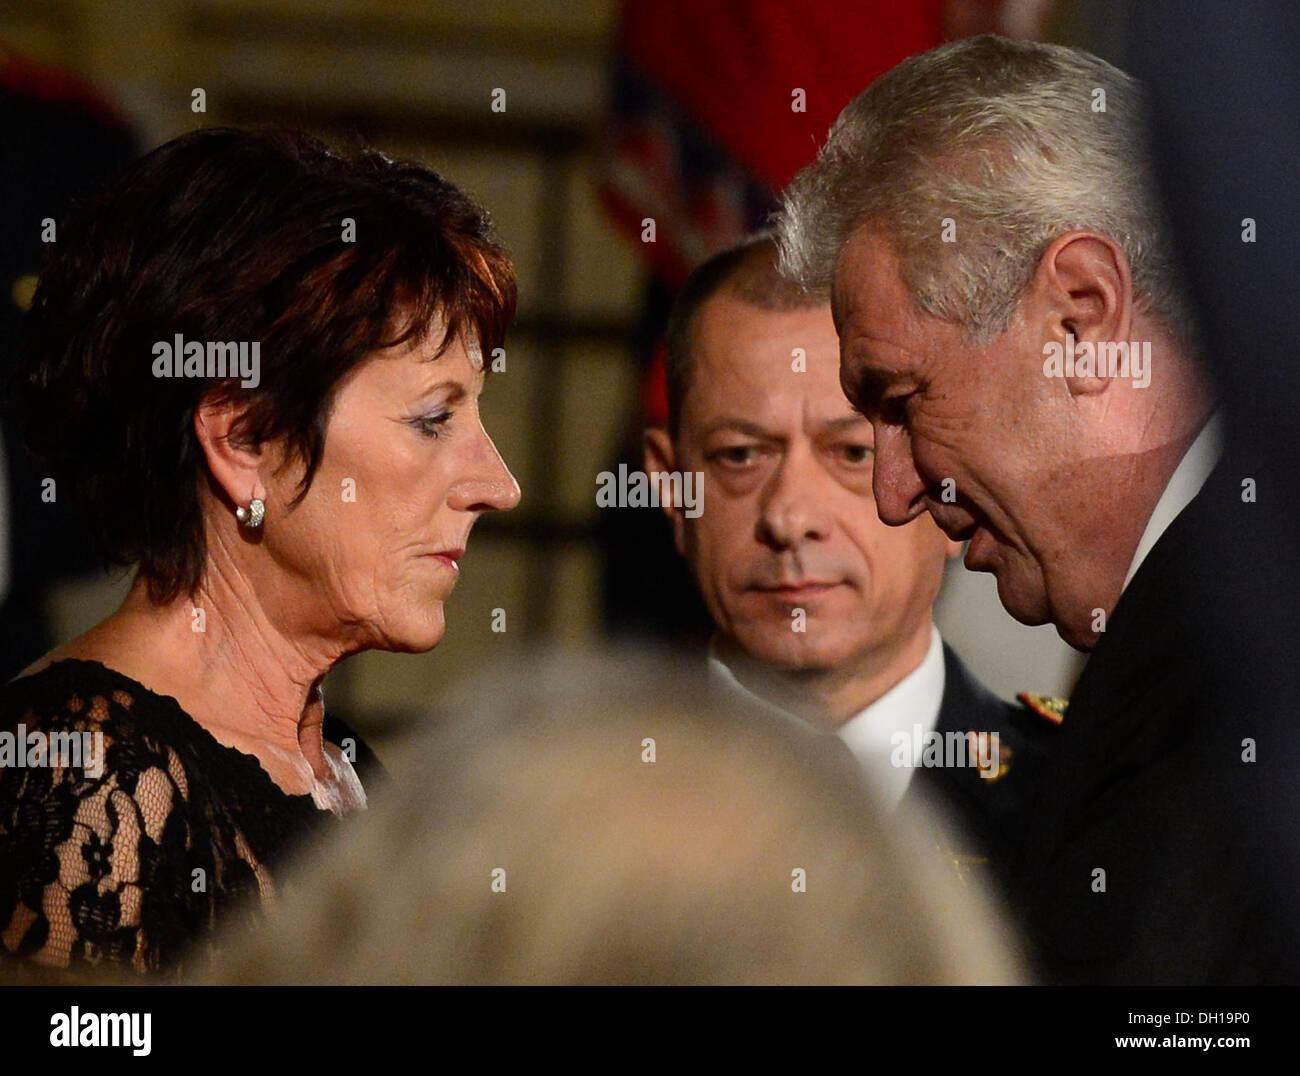 Prague, Czech Republic. 28th Oct, 2013. Czech President Milos Zeman awarded 29 selected personalities on the 95th anniversary of establishment of Independent Czechoslovakia today and said he does not comprehend history as a competition of abstract ideas, but as a competition of specific people´s ideas. He said the path of none of the awarded was steeply rising right from the start, but that they had often to cope with injuries, mistakes or slanders. Two of the 29 awarded got the Order of Tomas Garrigue Masaryk, the rest the Medal of Merit. © CTK/Alamy Live News Stock Photo